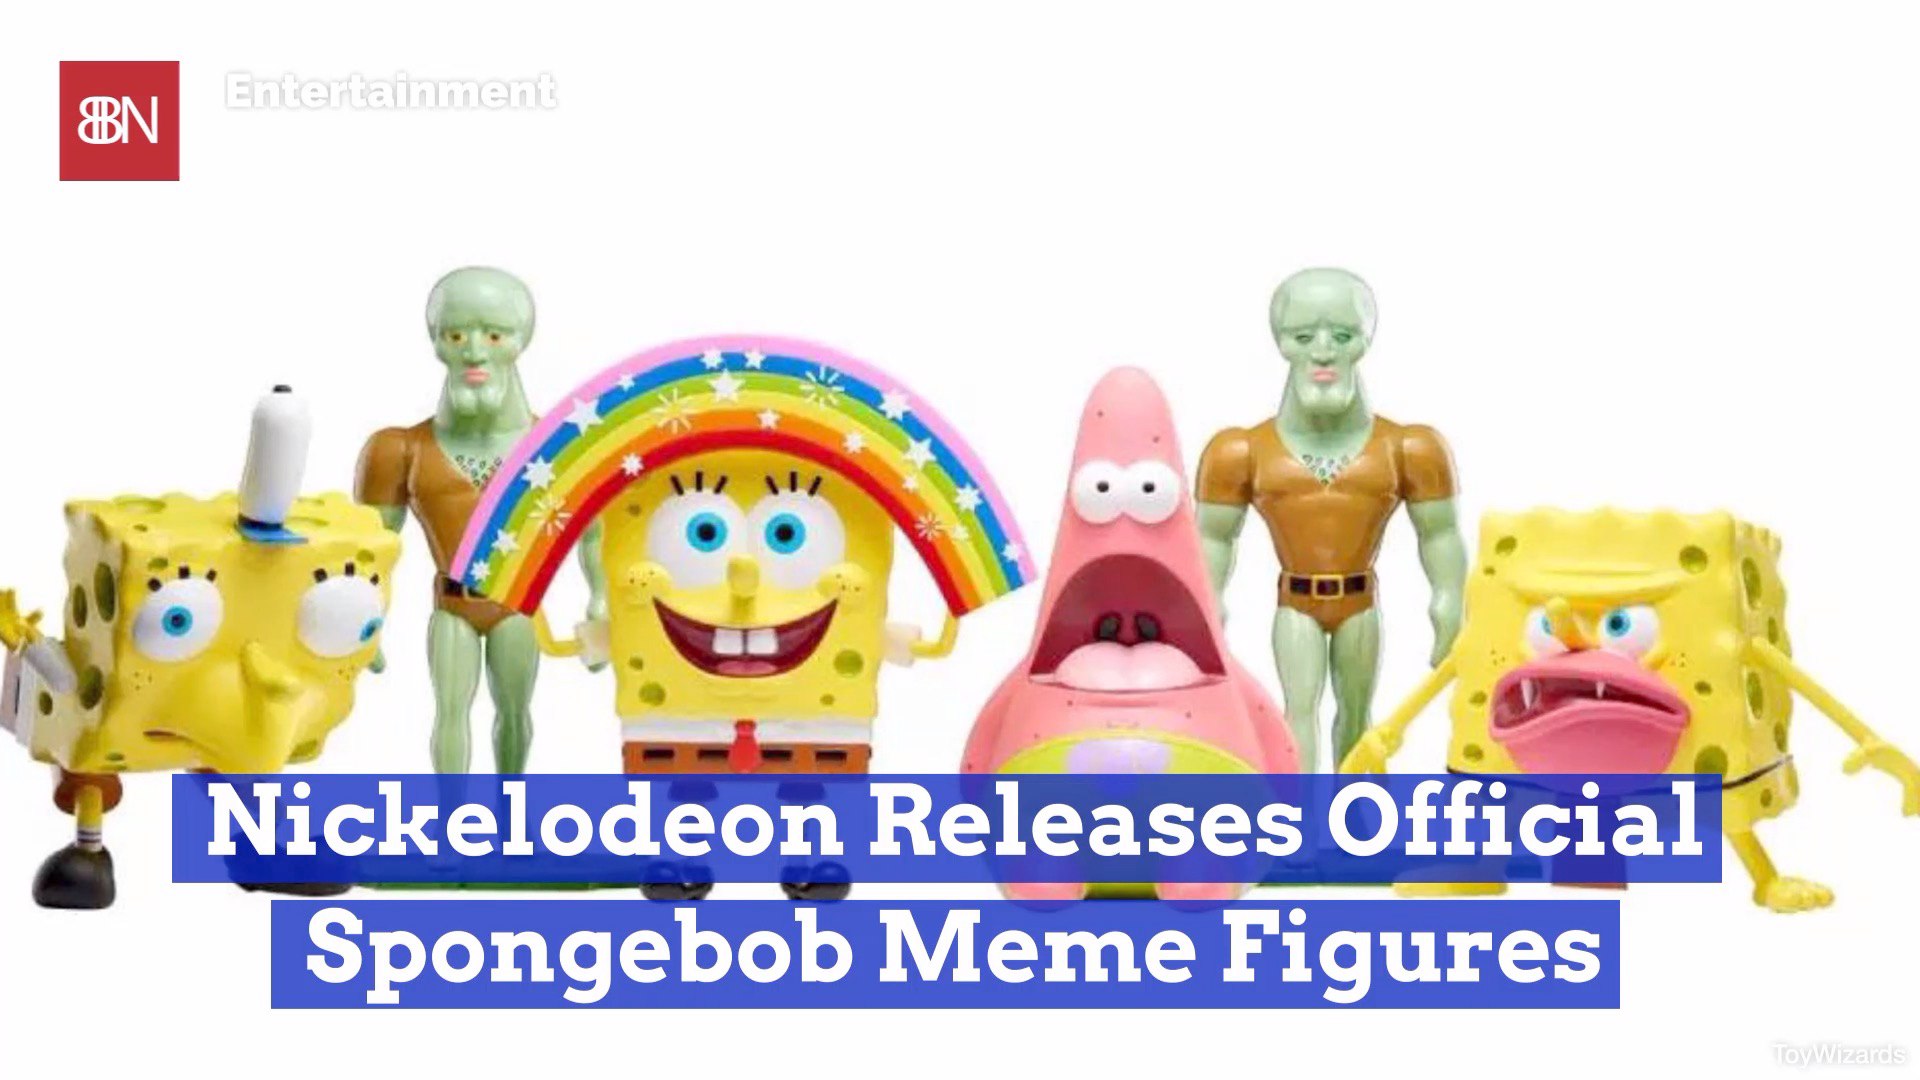 Here Are The Spongebob Meme Figures - video Dailymotion